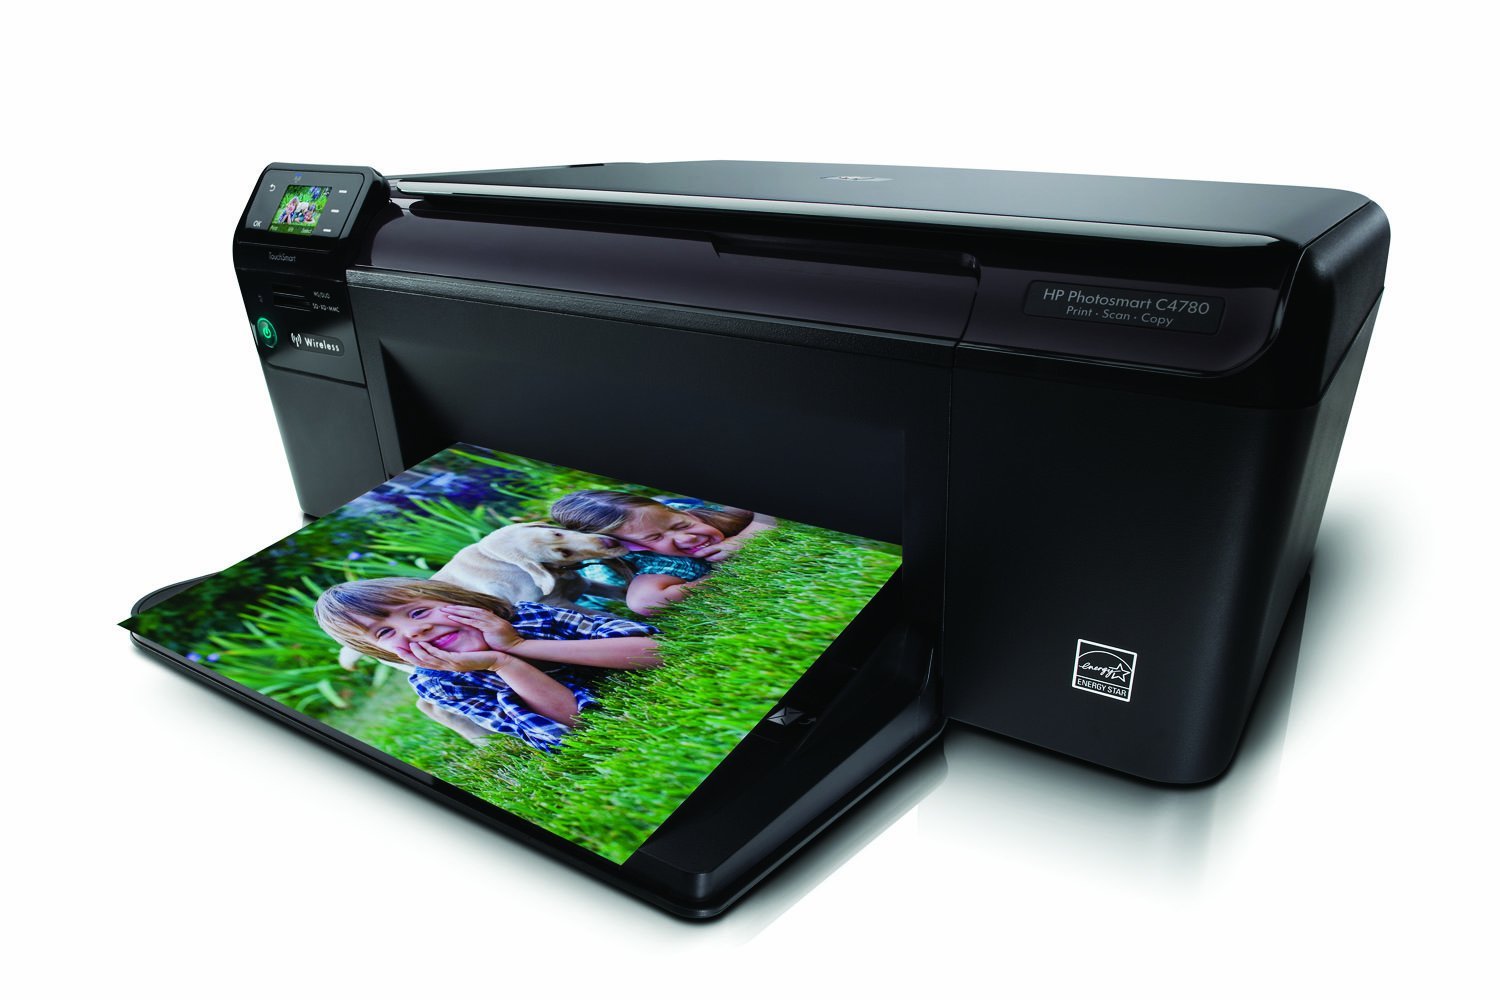 Hp Photosmart C4780 All In One Printer Q8380aaba N3 Free Image Download 7007